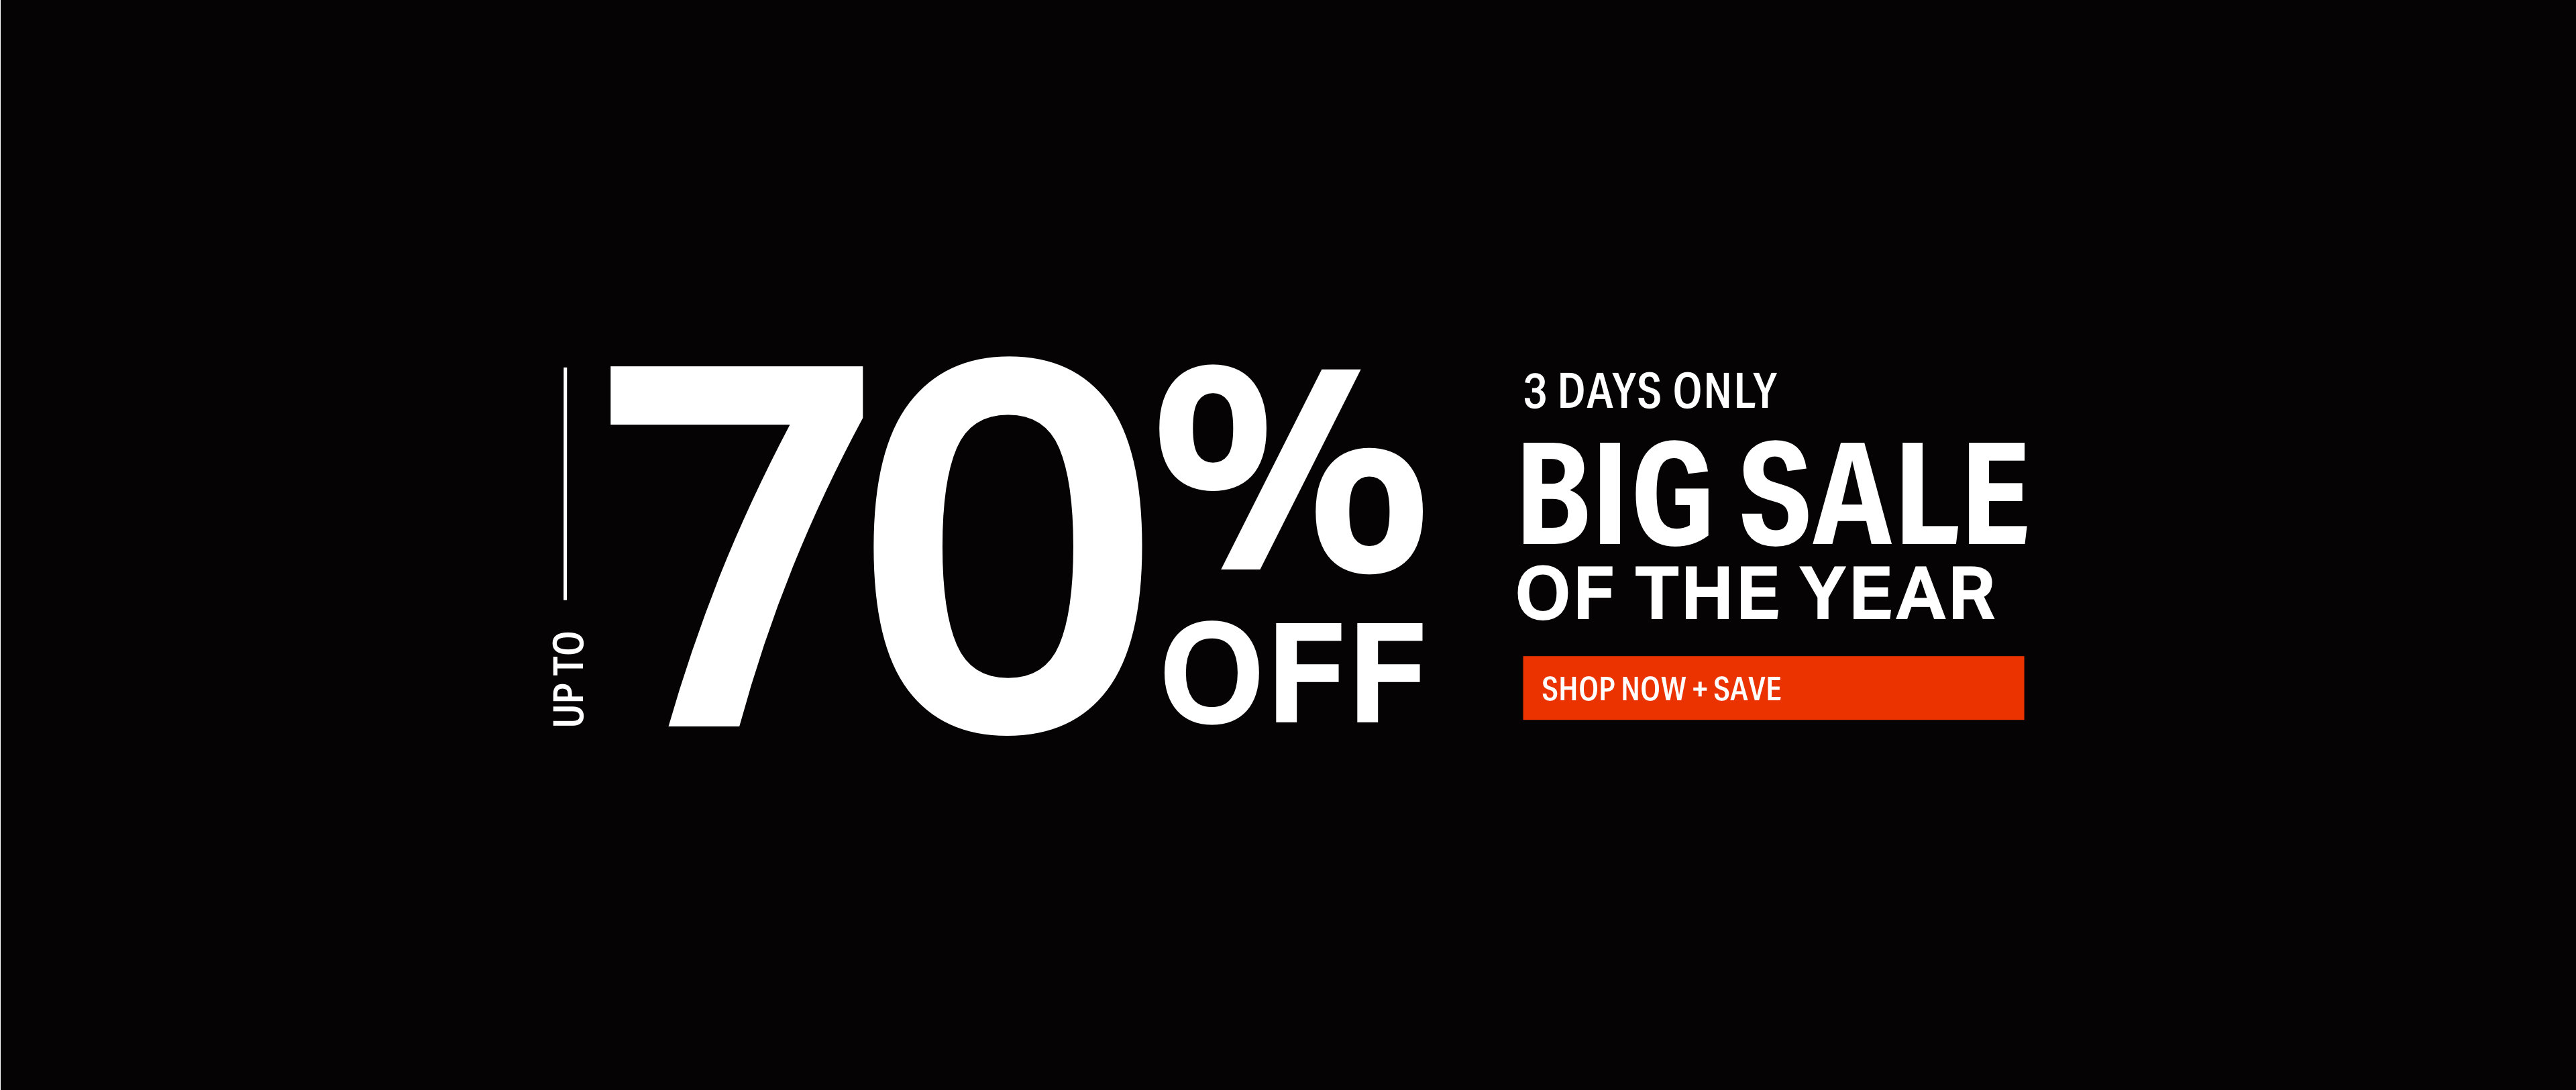 Big Sale of The Year - Up To 70% Off